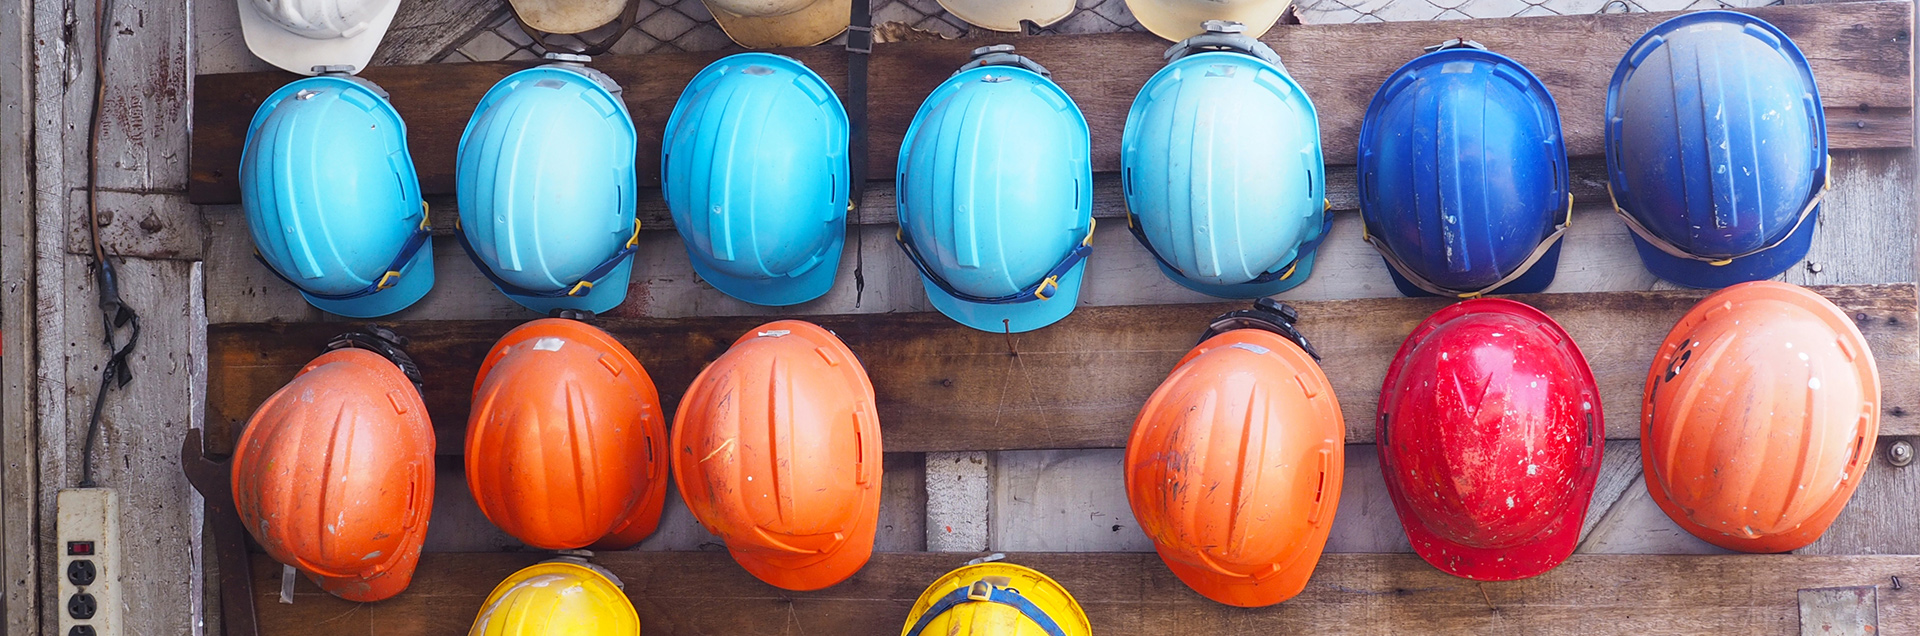 Array of hardhats representing construction workers